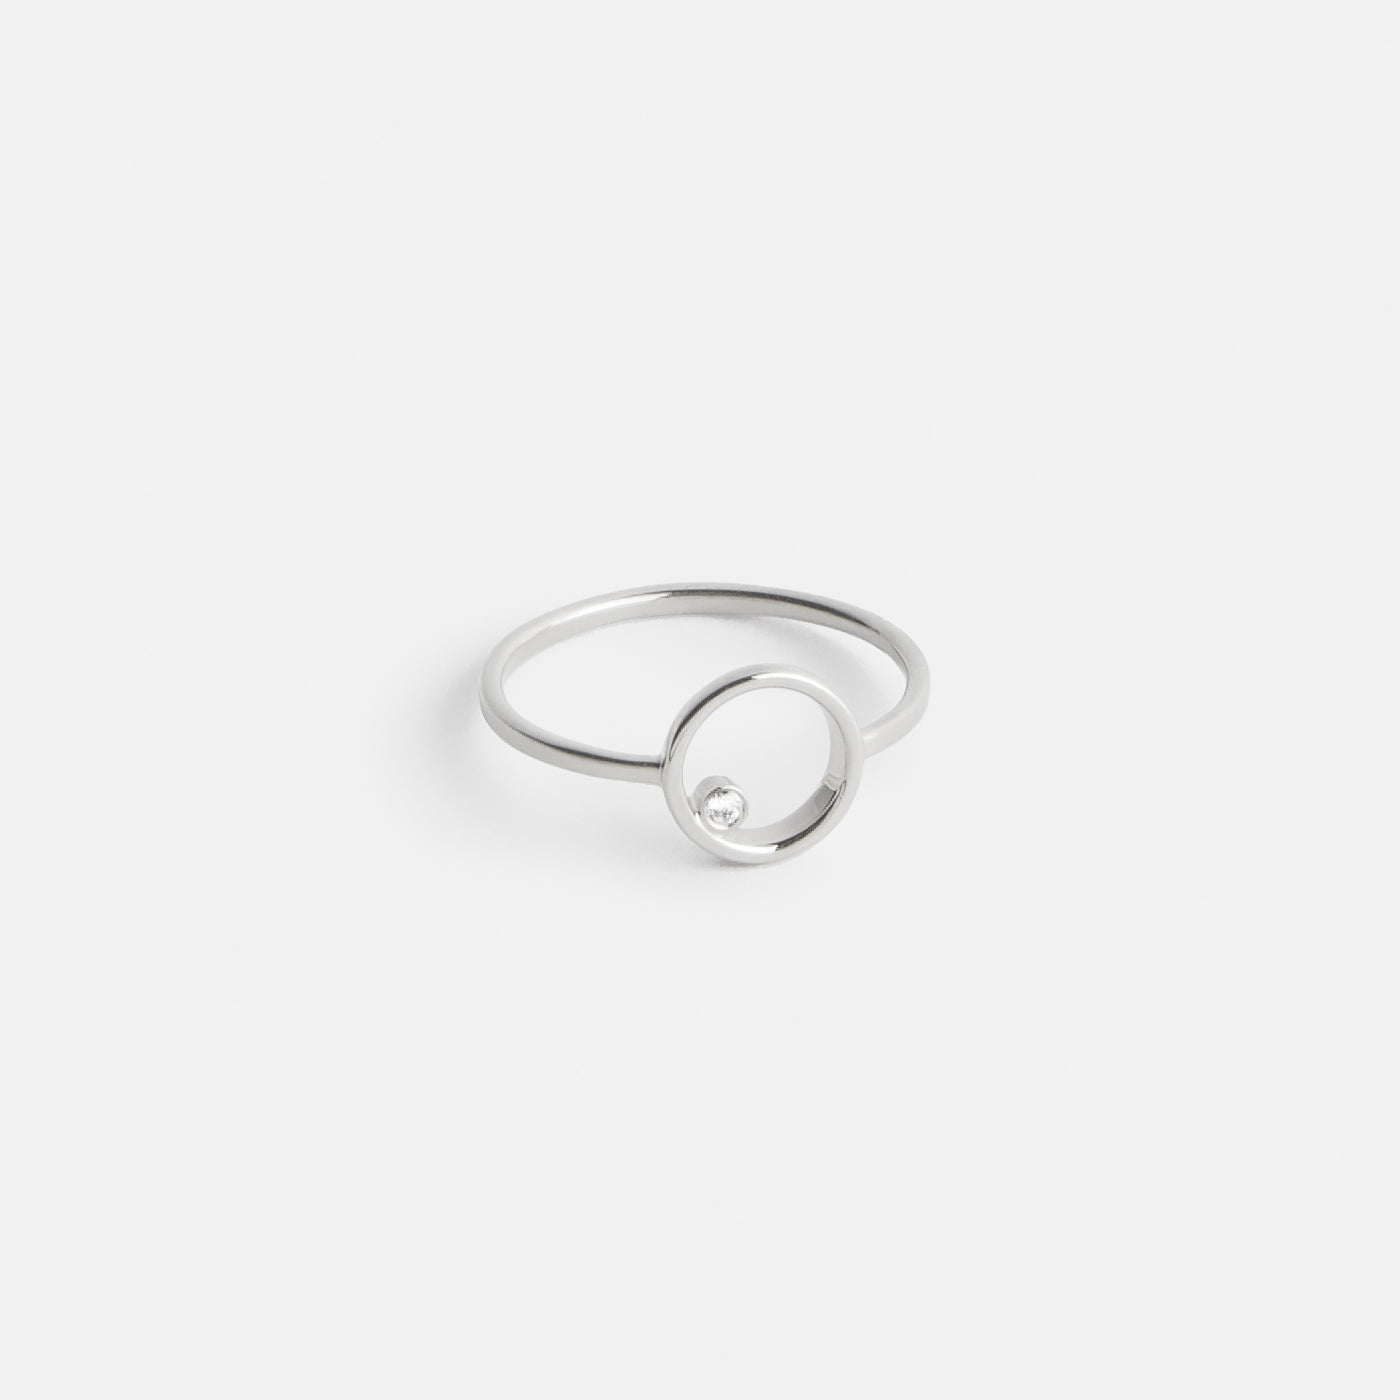 Ila Thin Ring in Sterling Silver set with White Diamond by SHW Fine Jewelry NYC